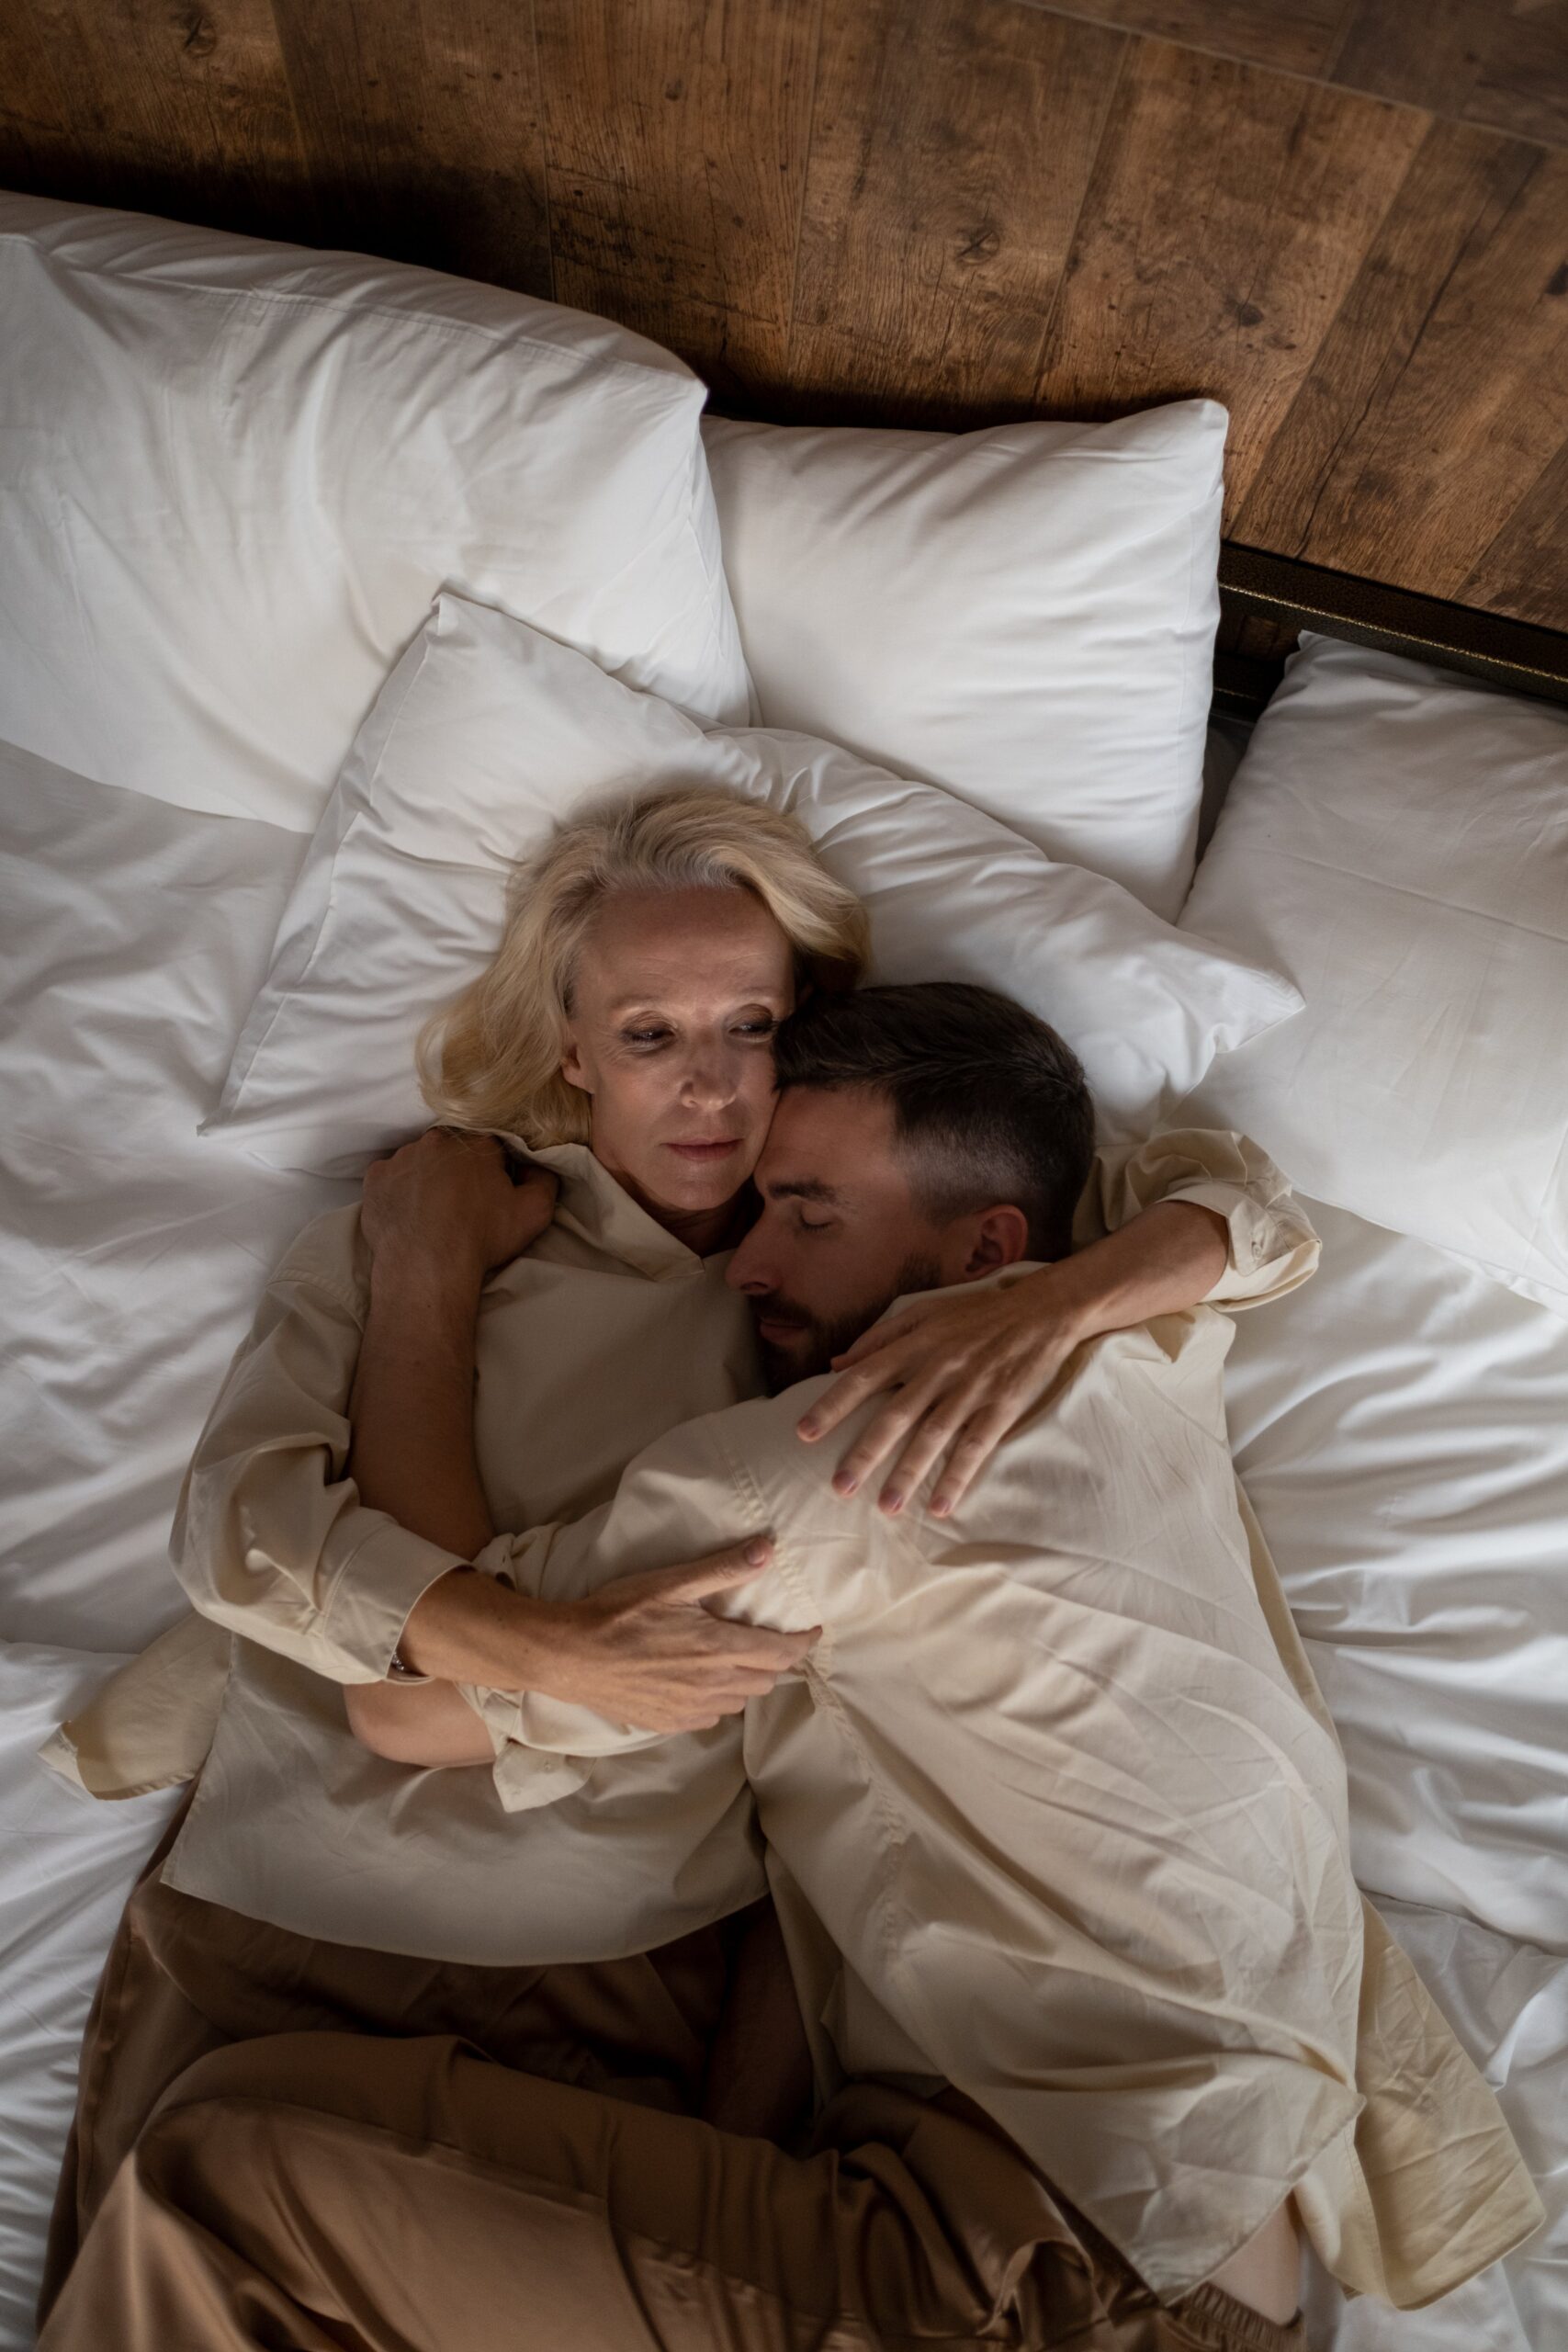 A photo of two people, a man and a woman, wearing beige clothes and cuddling in a white bed. Used as the featured image for GETSOME's post on how to unlearn and overcome feelings of sexual shame.